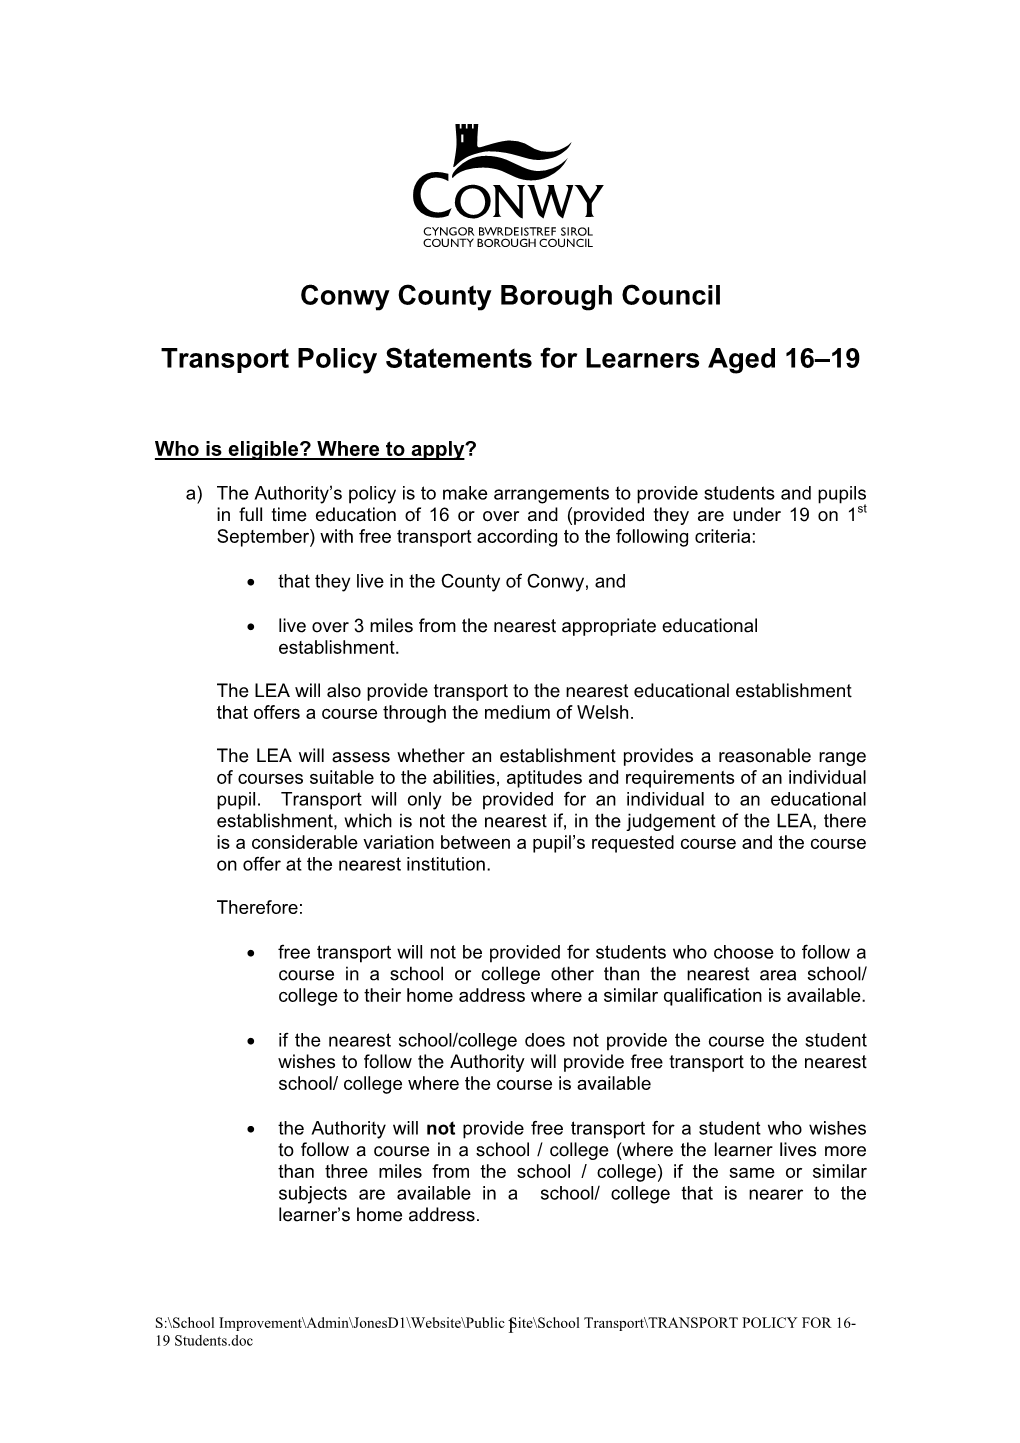 Transport Policy for Learners Aged 16-19